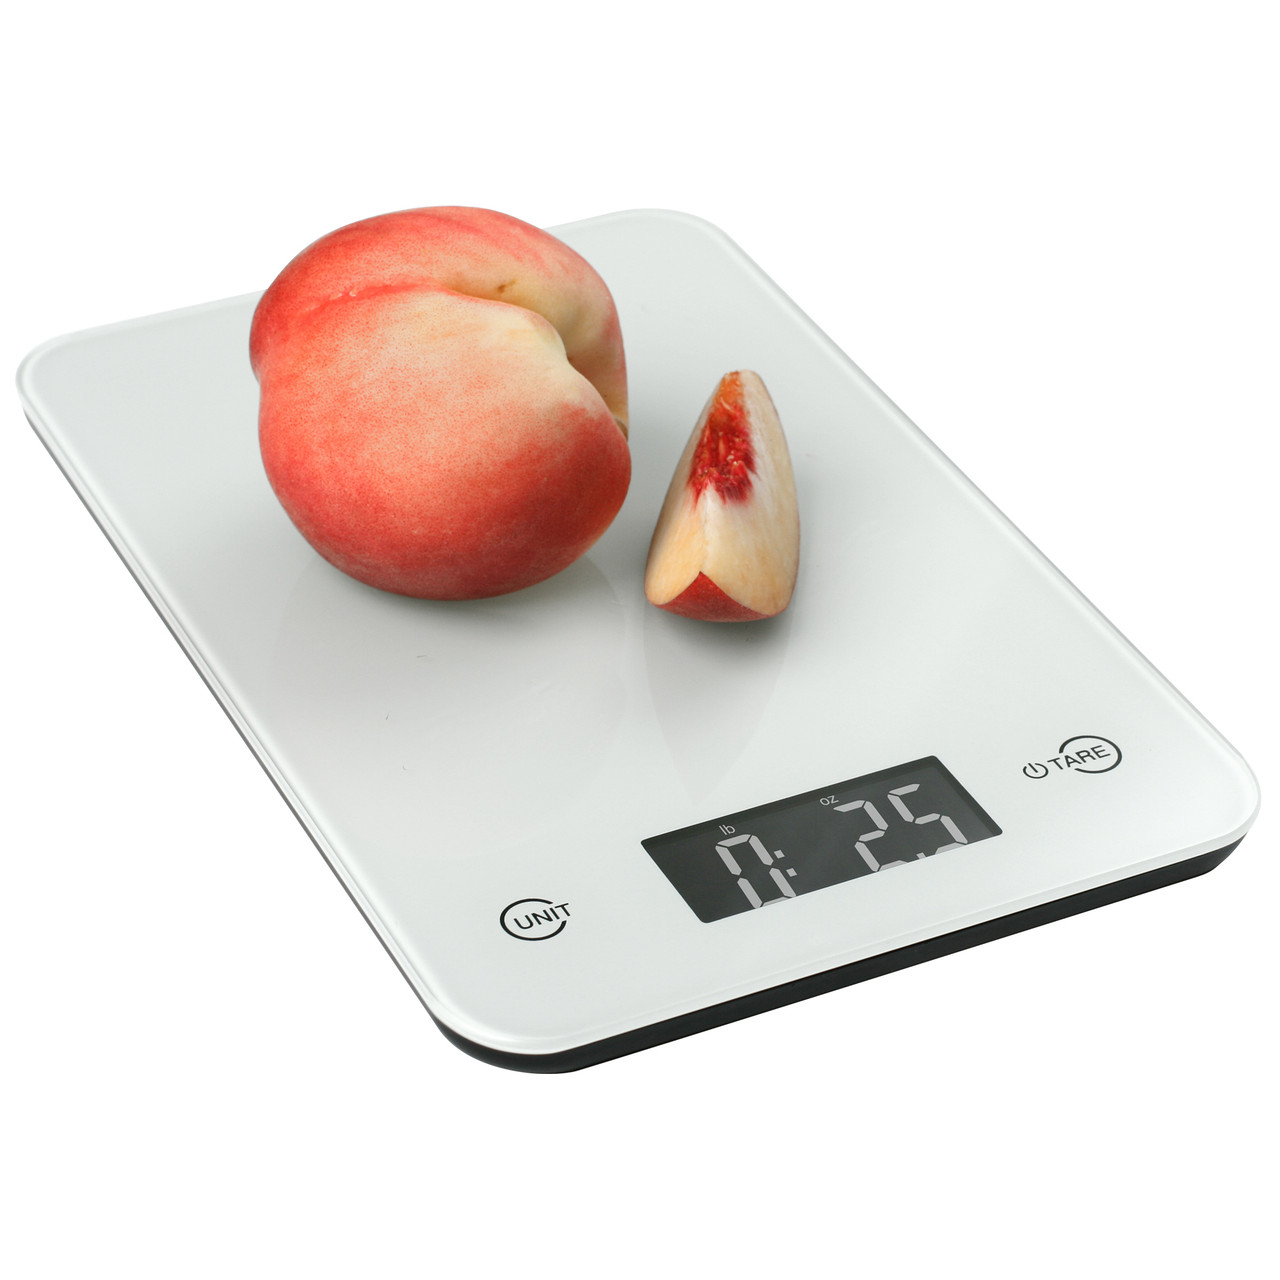 ONYX-5K Digital Kitchen Weight Scale - American Weigh Scales